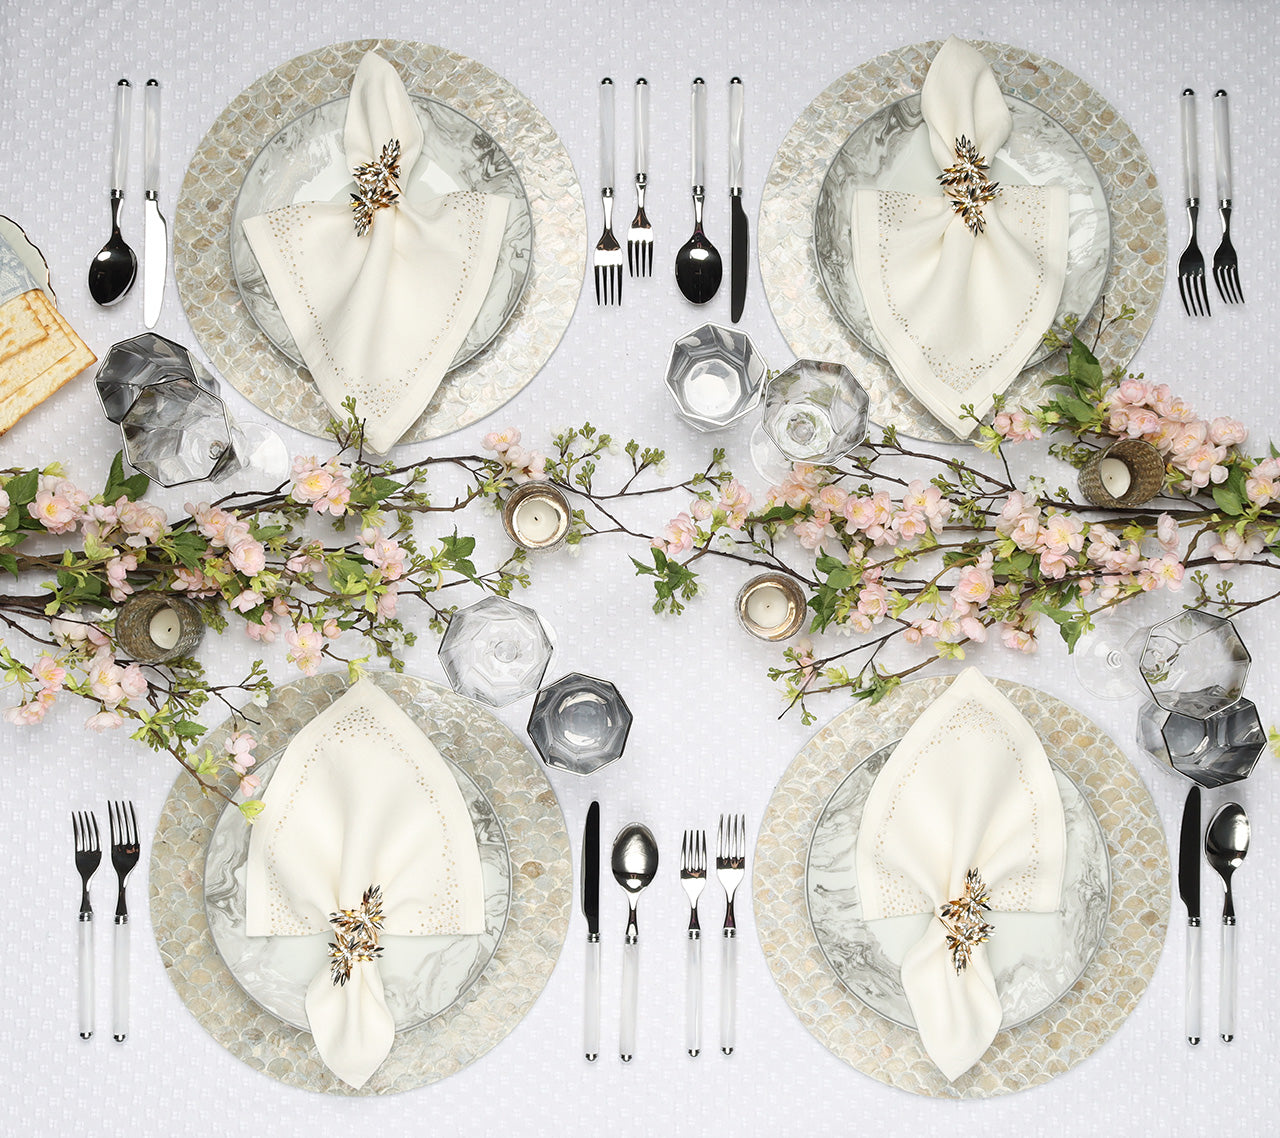 Overhead view of a table with four place setting featuring white Pin Dot Napkins